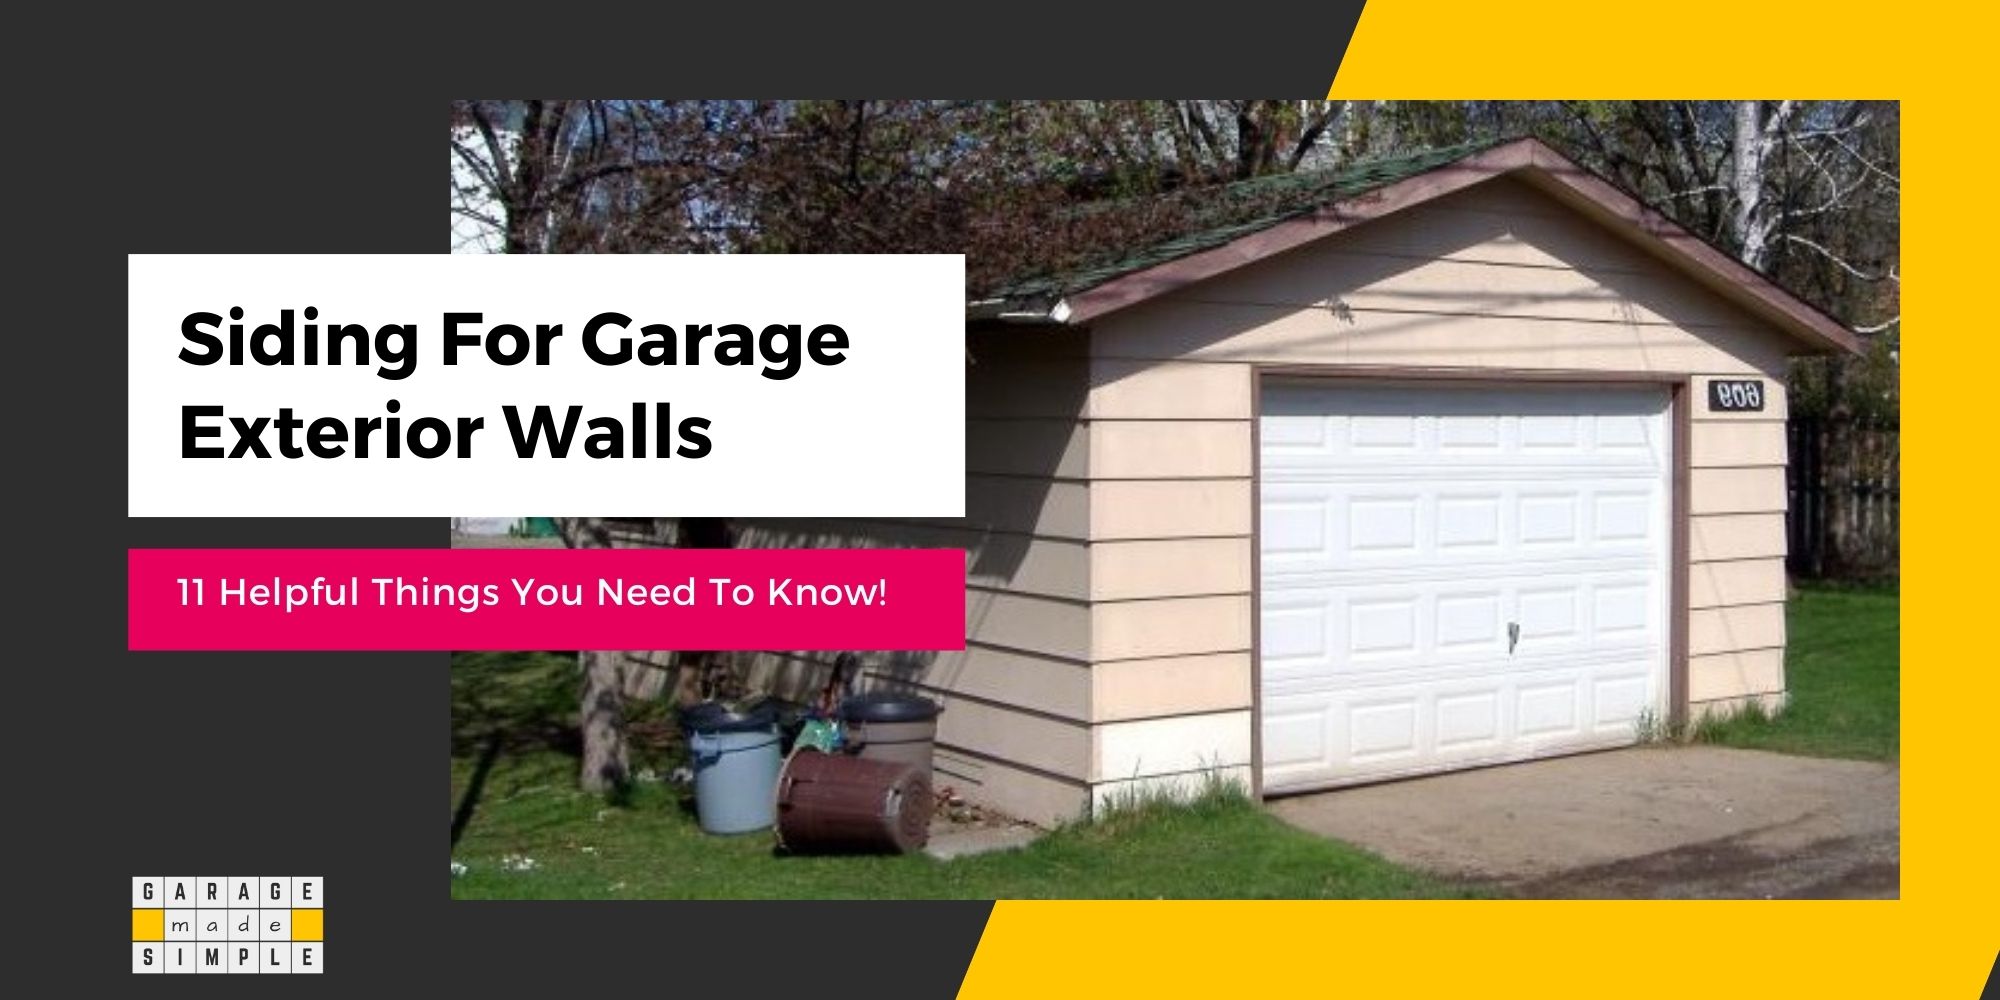 10 Popular Siding for Garage Options: What is the Best?